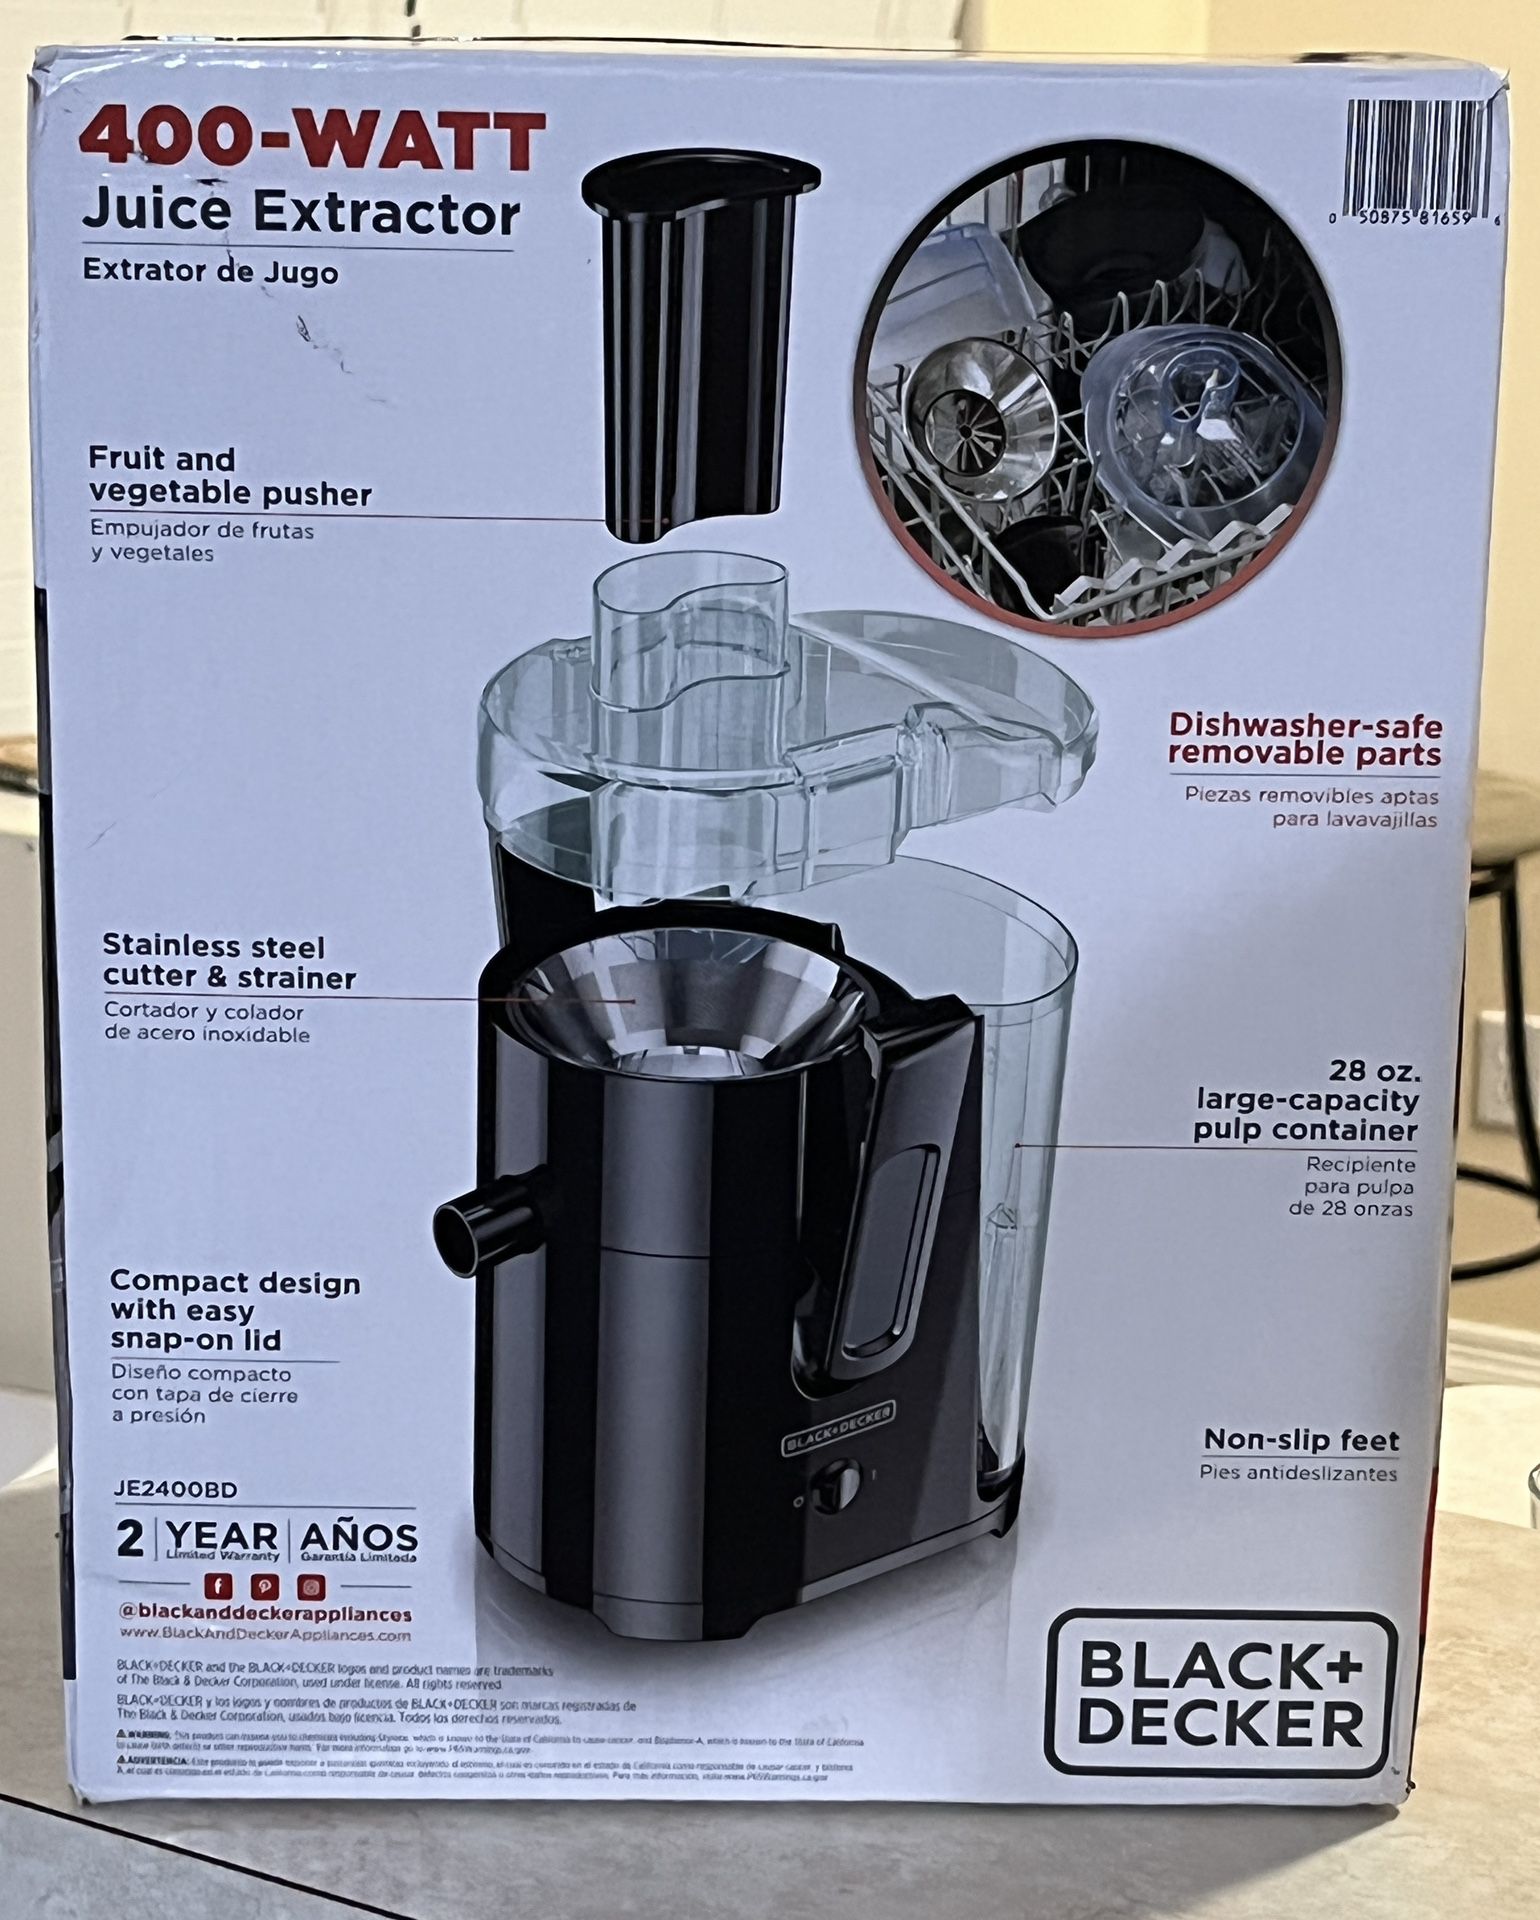 Black+Decker JE2200B Juicer Review - Consumer Reports